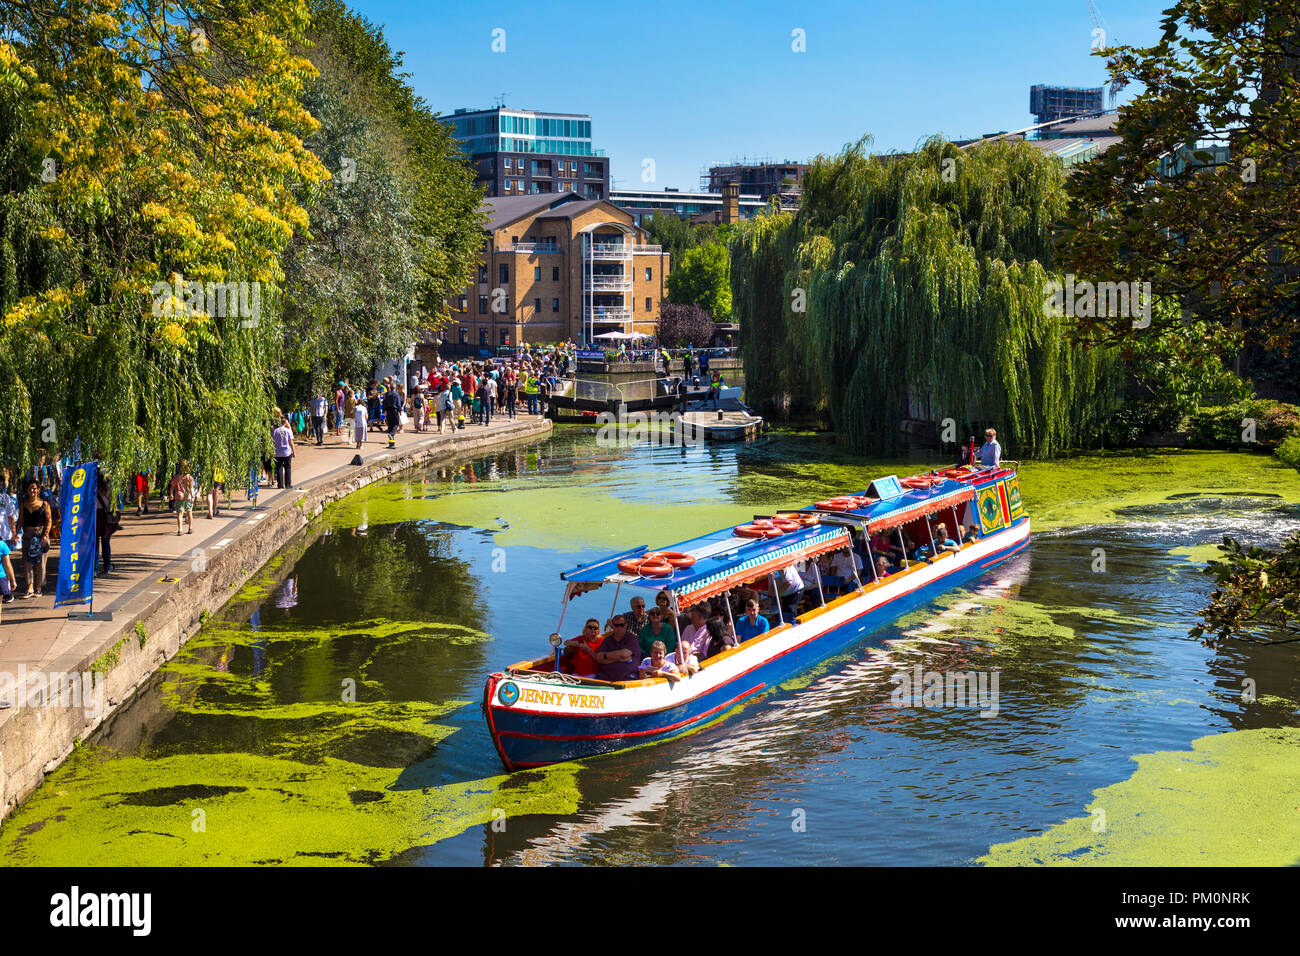 A barge tour on the Regents Canal during Angel Canal Festival 2018, London, UK Stock Photo